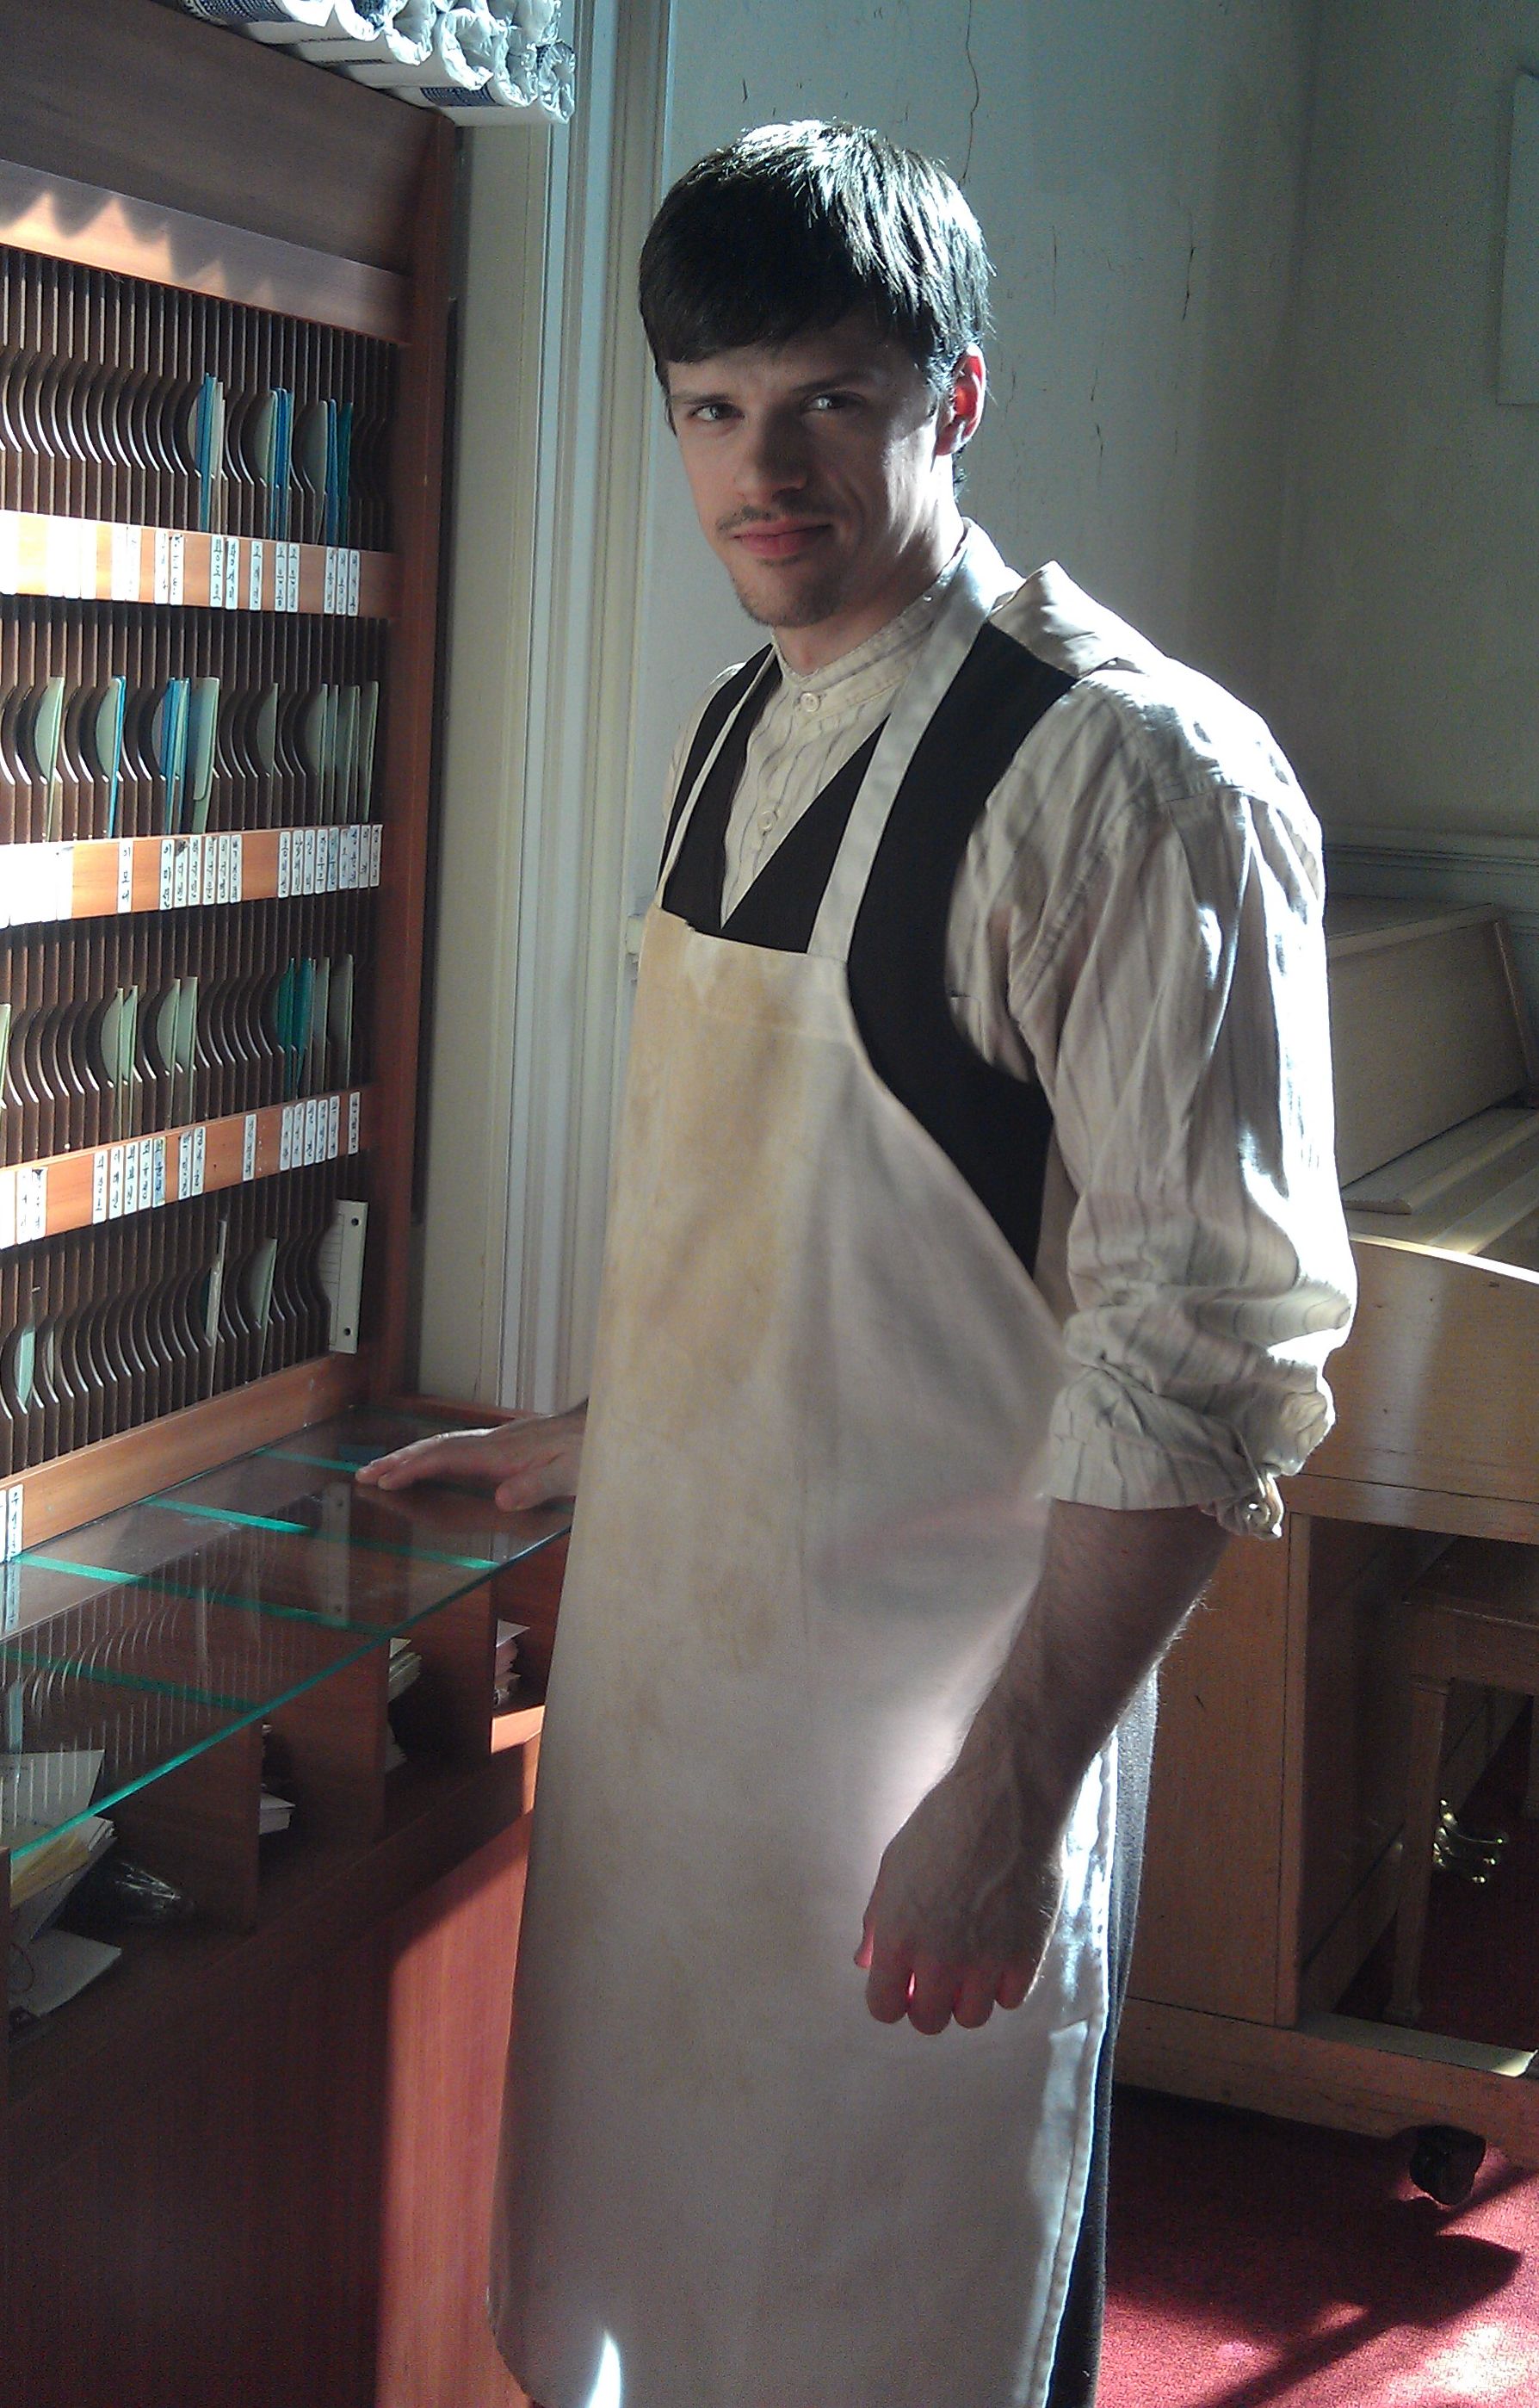 Production photo from Mysteries at the Museum as Andrew Kovalsky